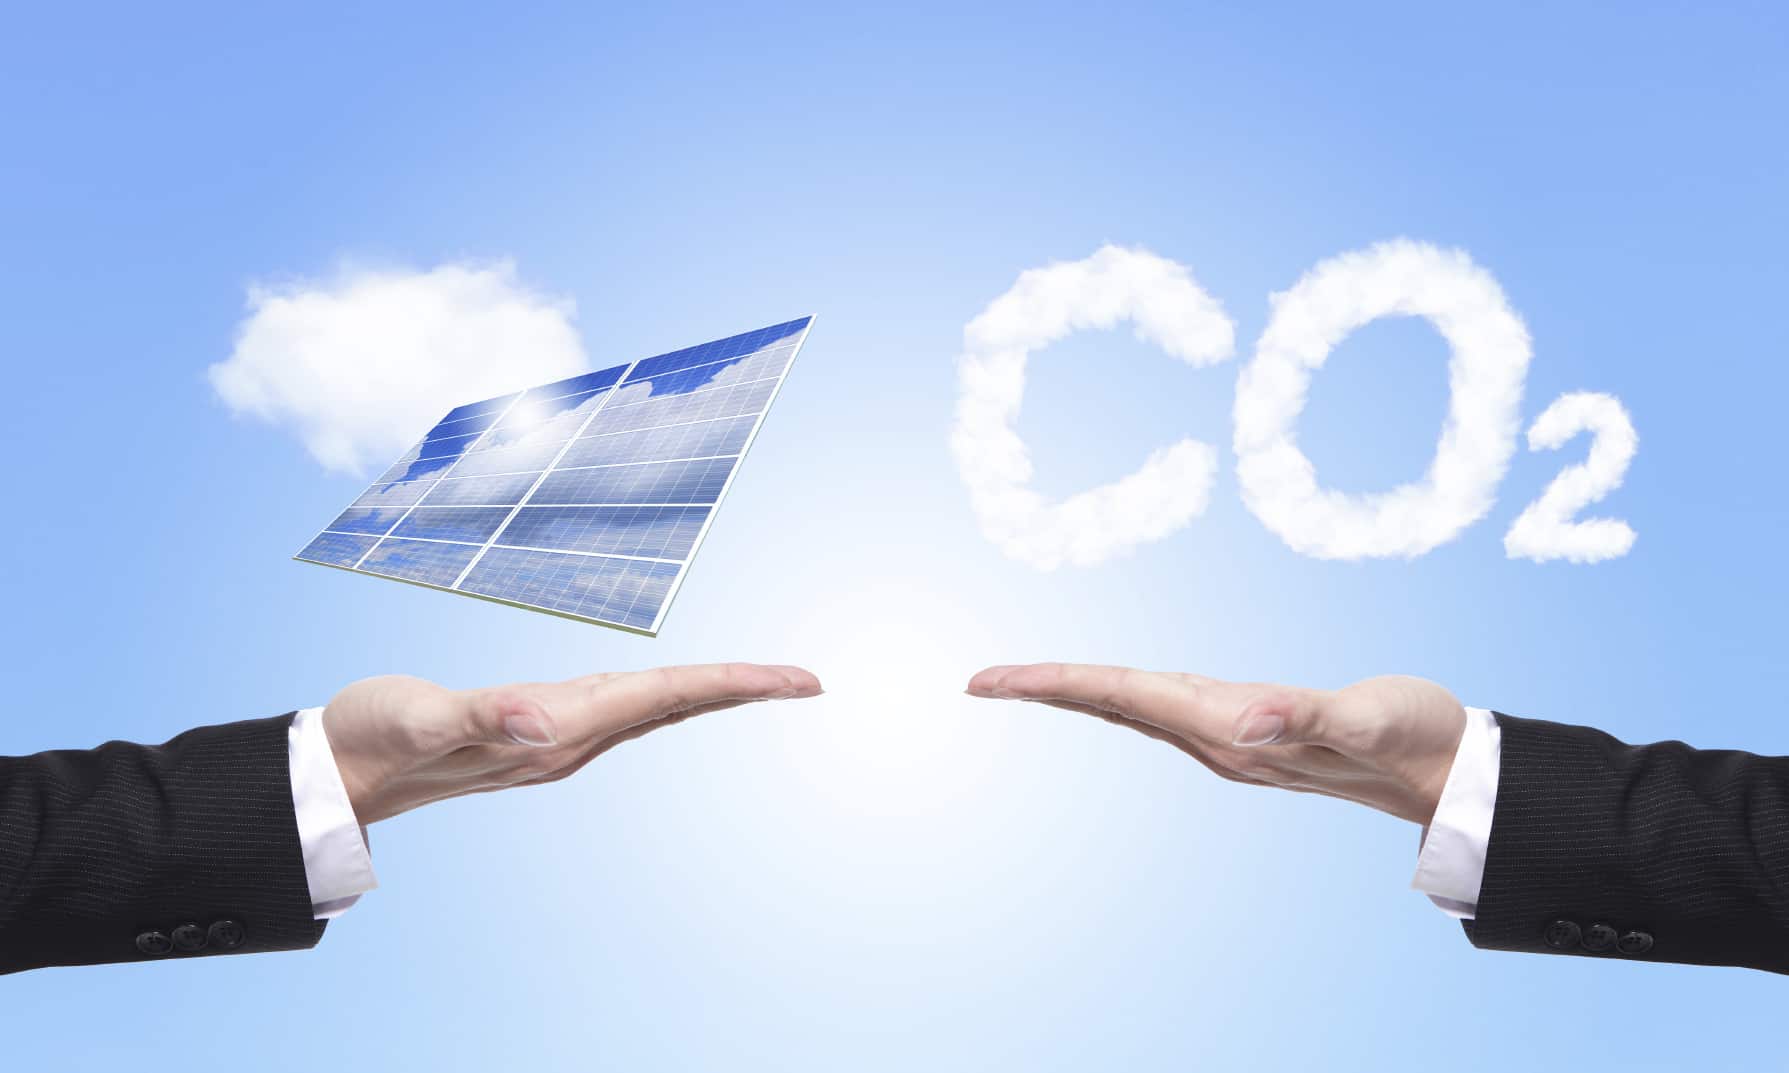 eco concept - choice solar panel or co2, Business man hold Alternative Energy (solar cell ) with blue sky and cloud background